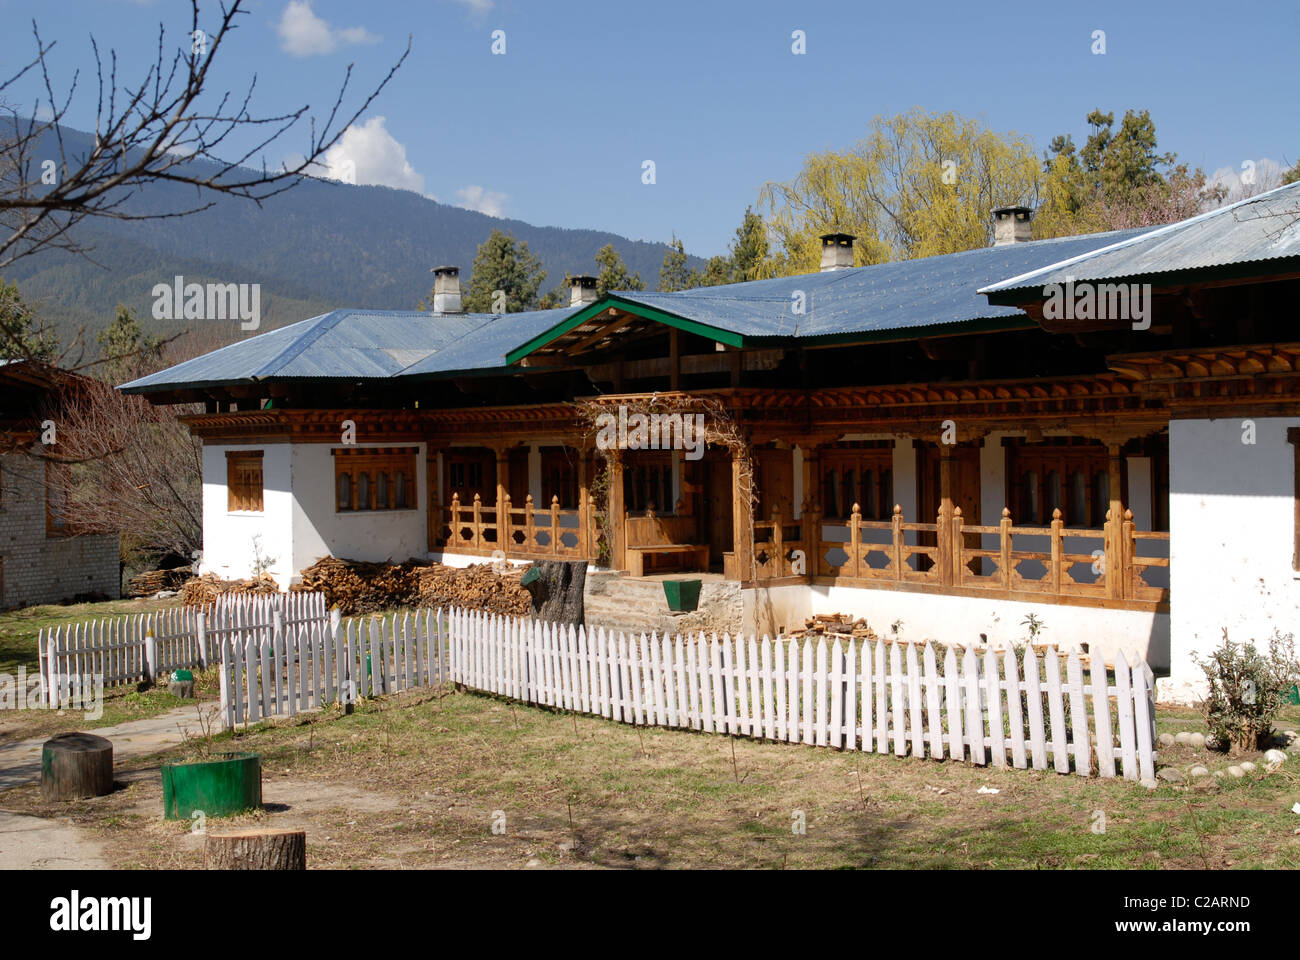 Building of the Swiss Farm, Bumthang, central Bhutan Stock Photo